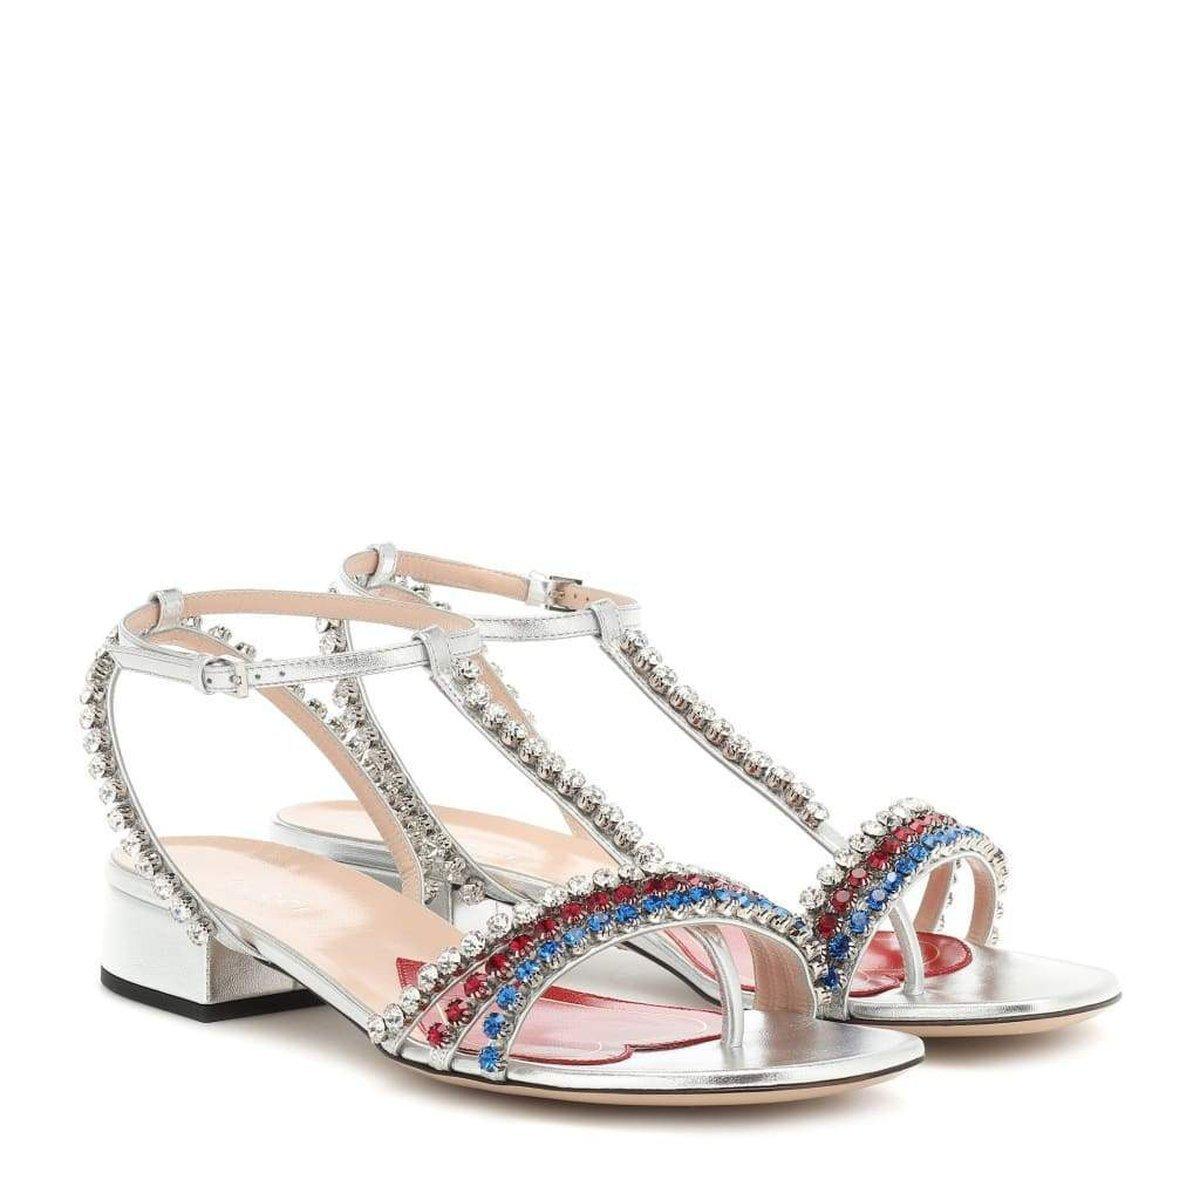 Women's Gucci Bertie Embellished Metallic Leather Sandals IT 39.5 For Sale